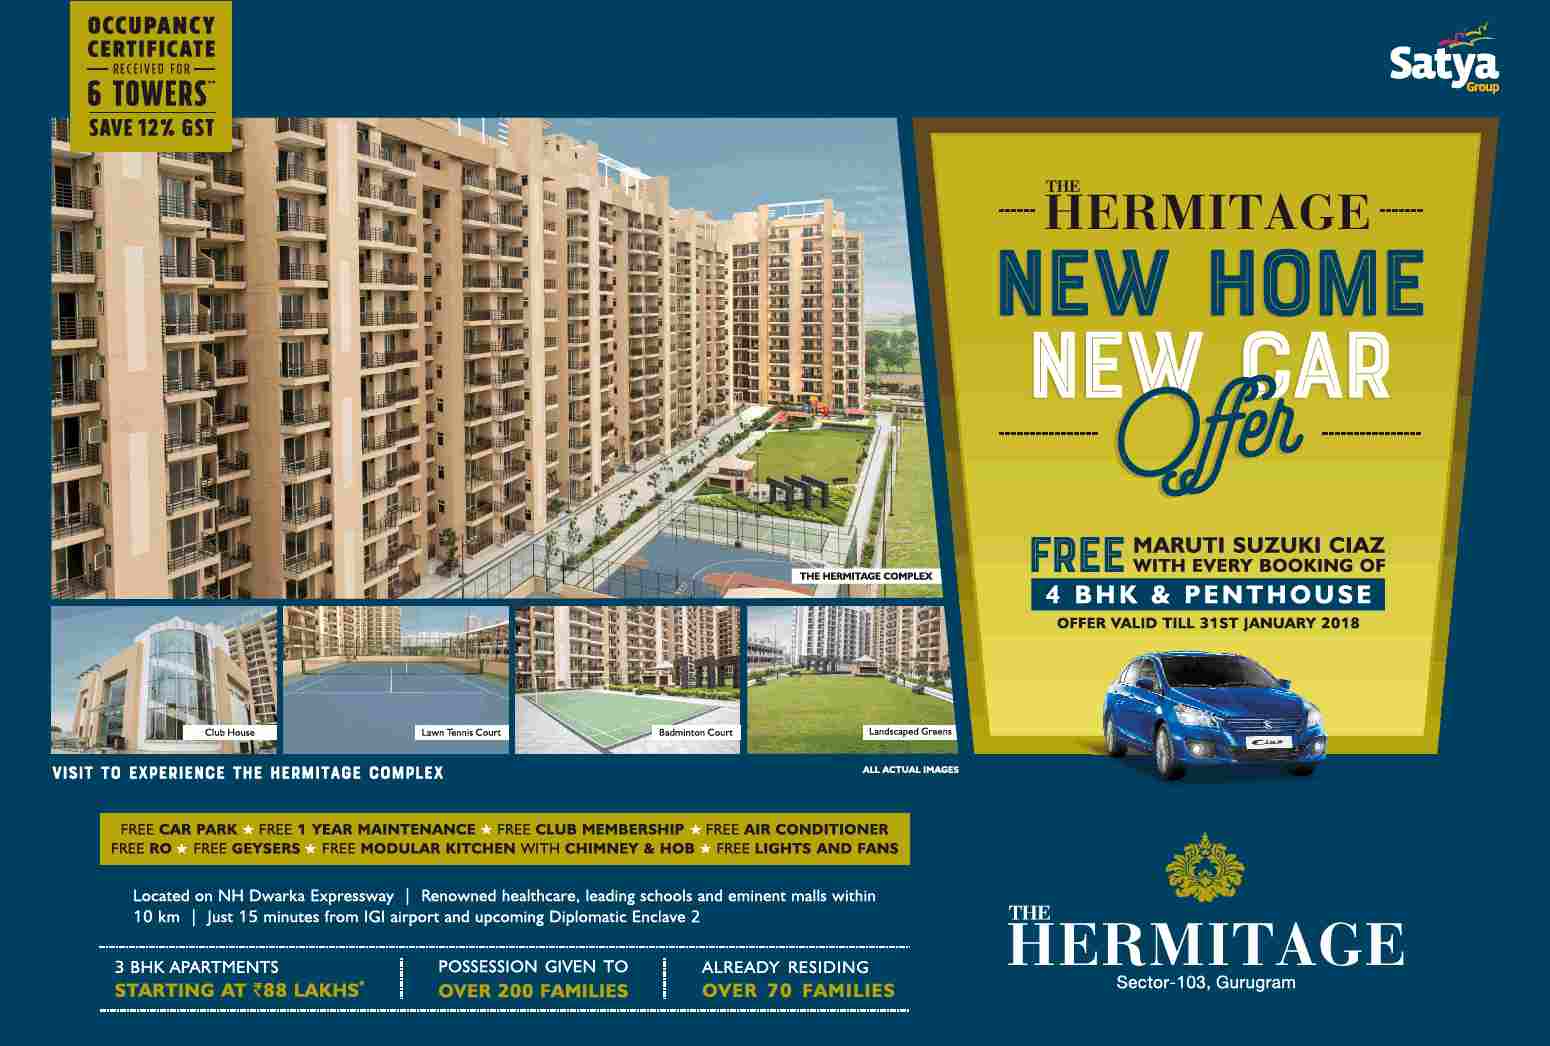 Satya The Hermitage brings the New Home New Car offer in Gurgaon Update